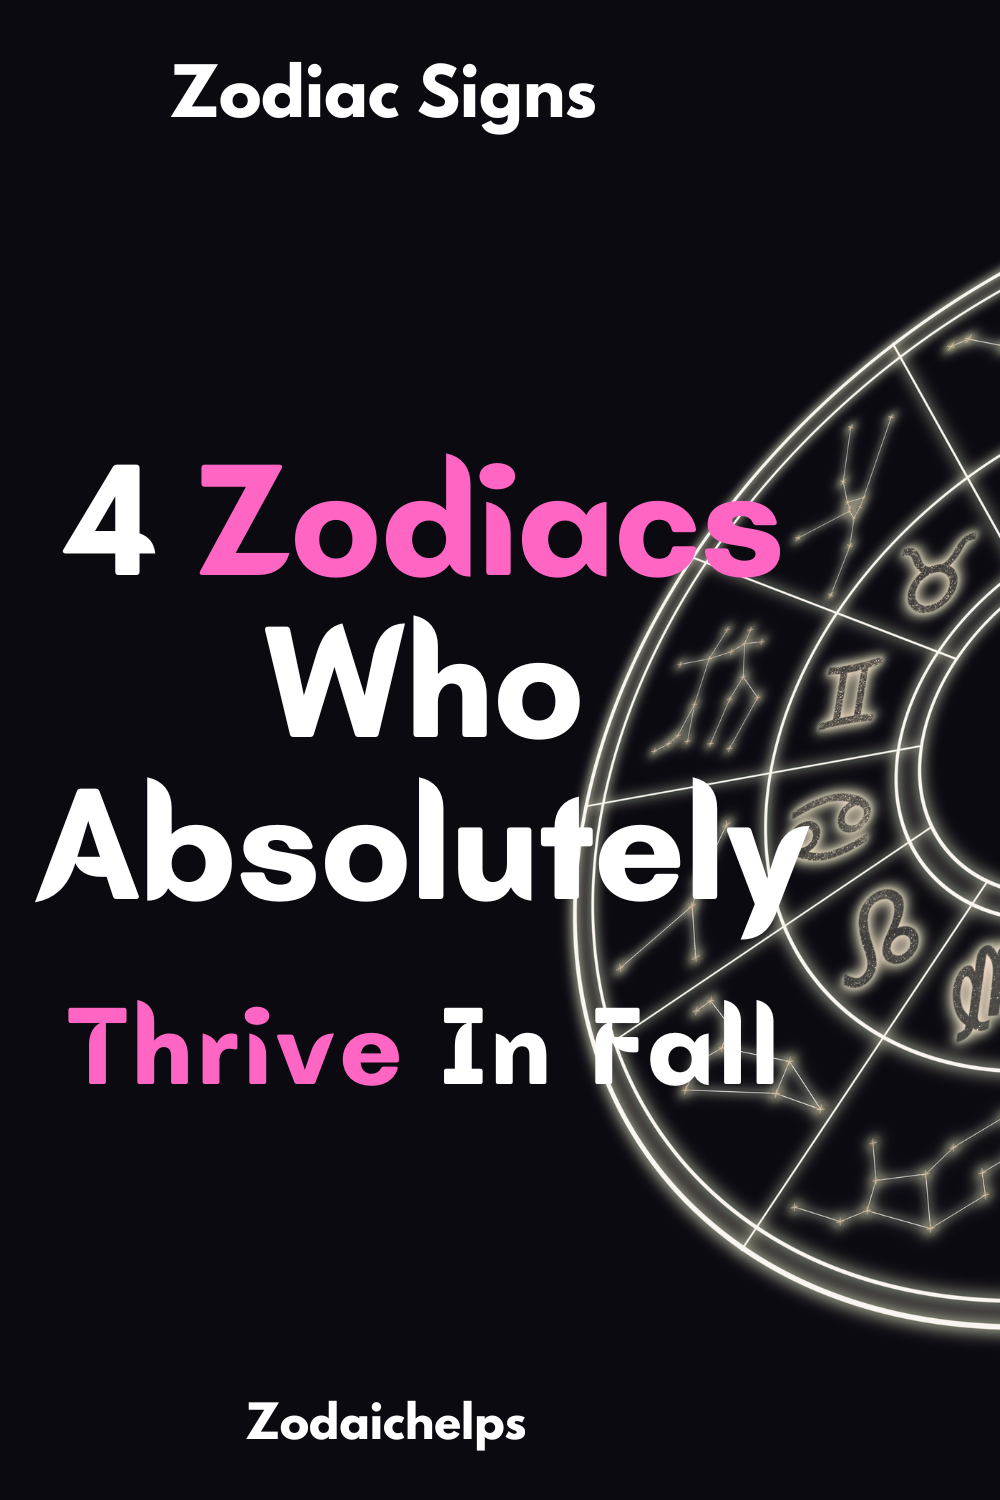 4 Zodiacs Who Absolutely Thrive In Fall